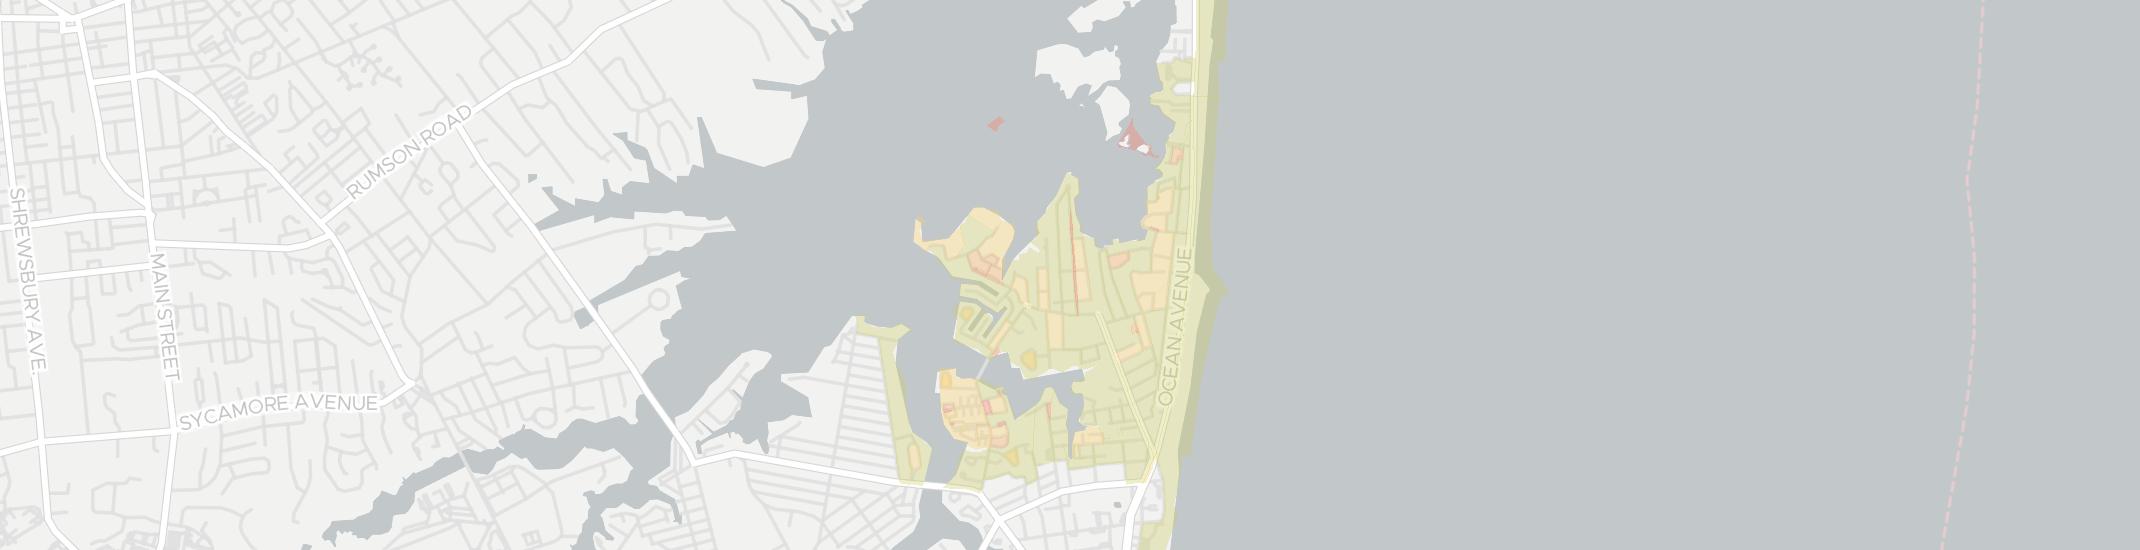 Monmouth Beach Internet Competition Map. Click for interactive map.